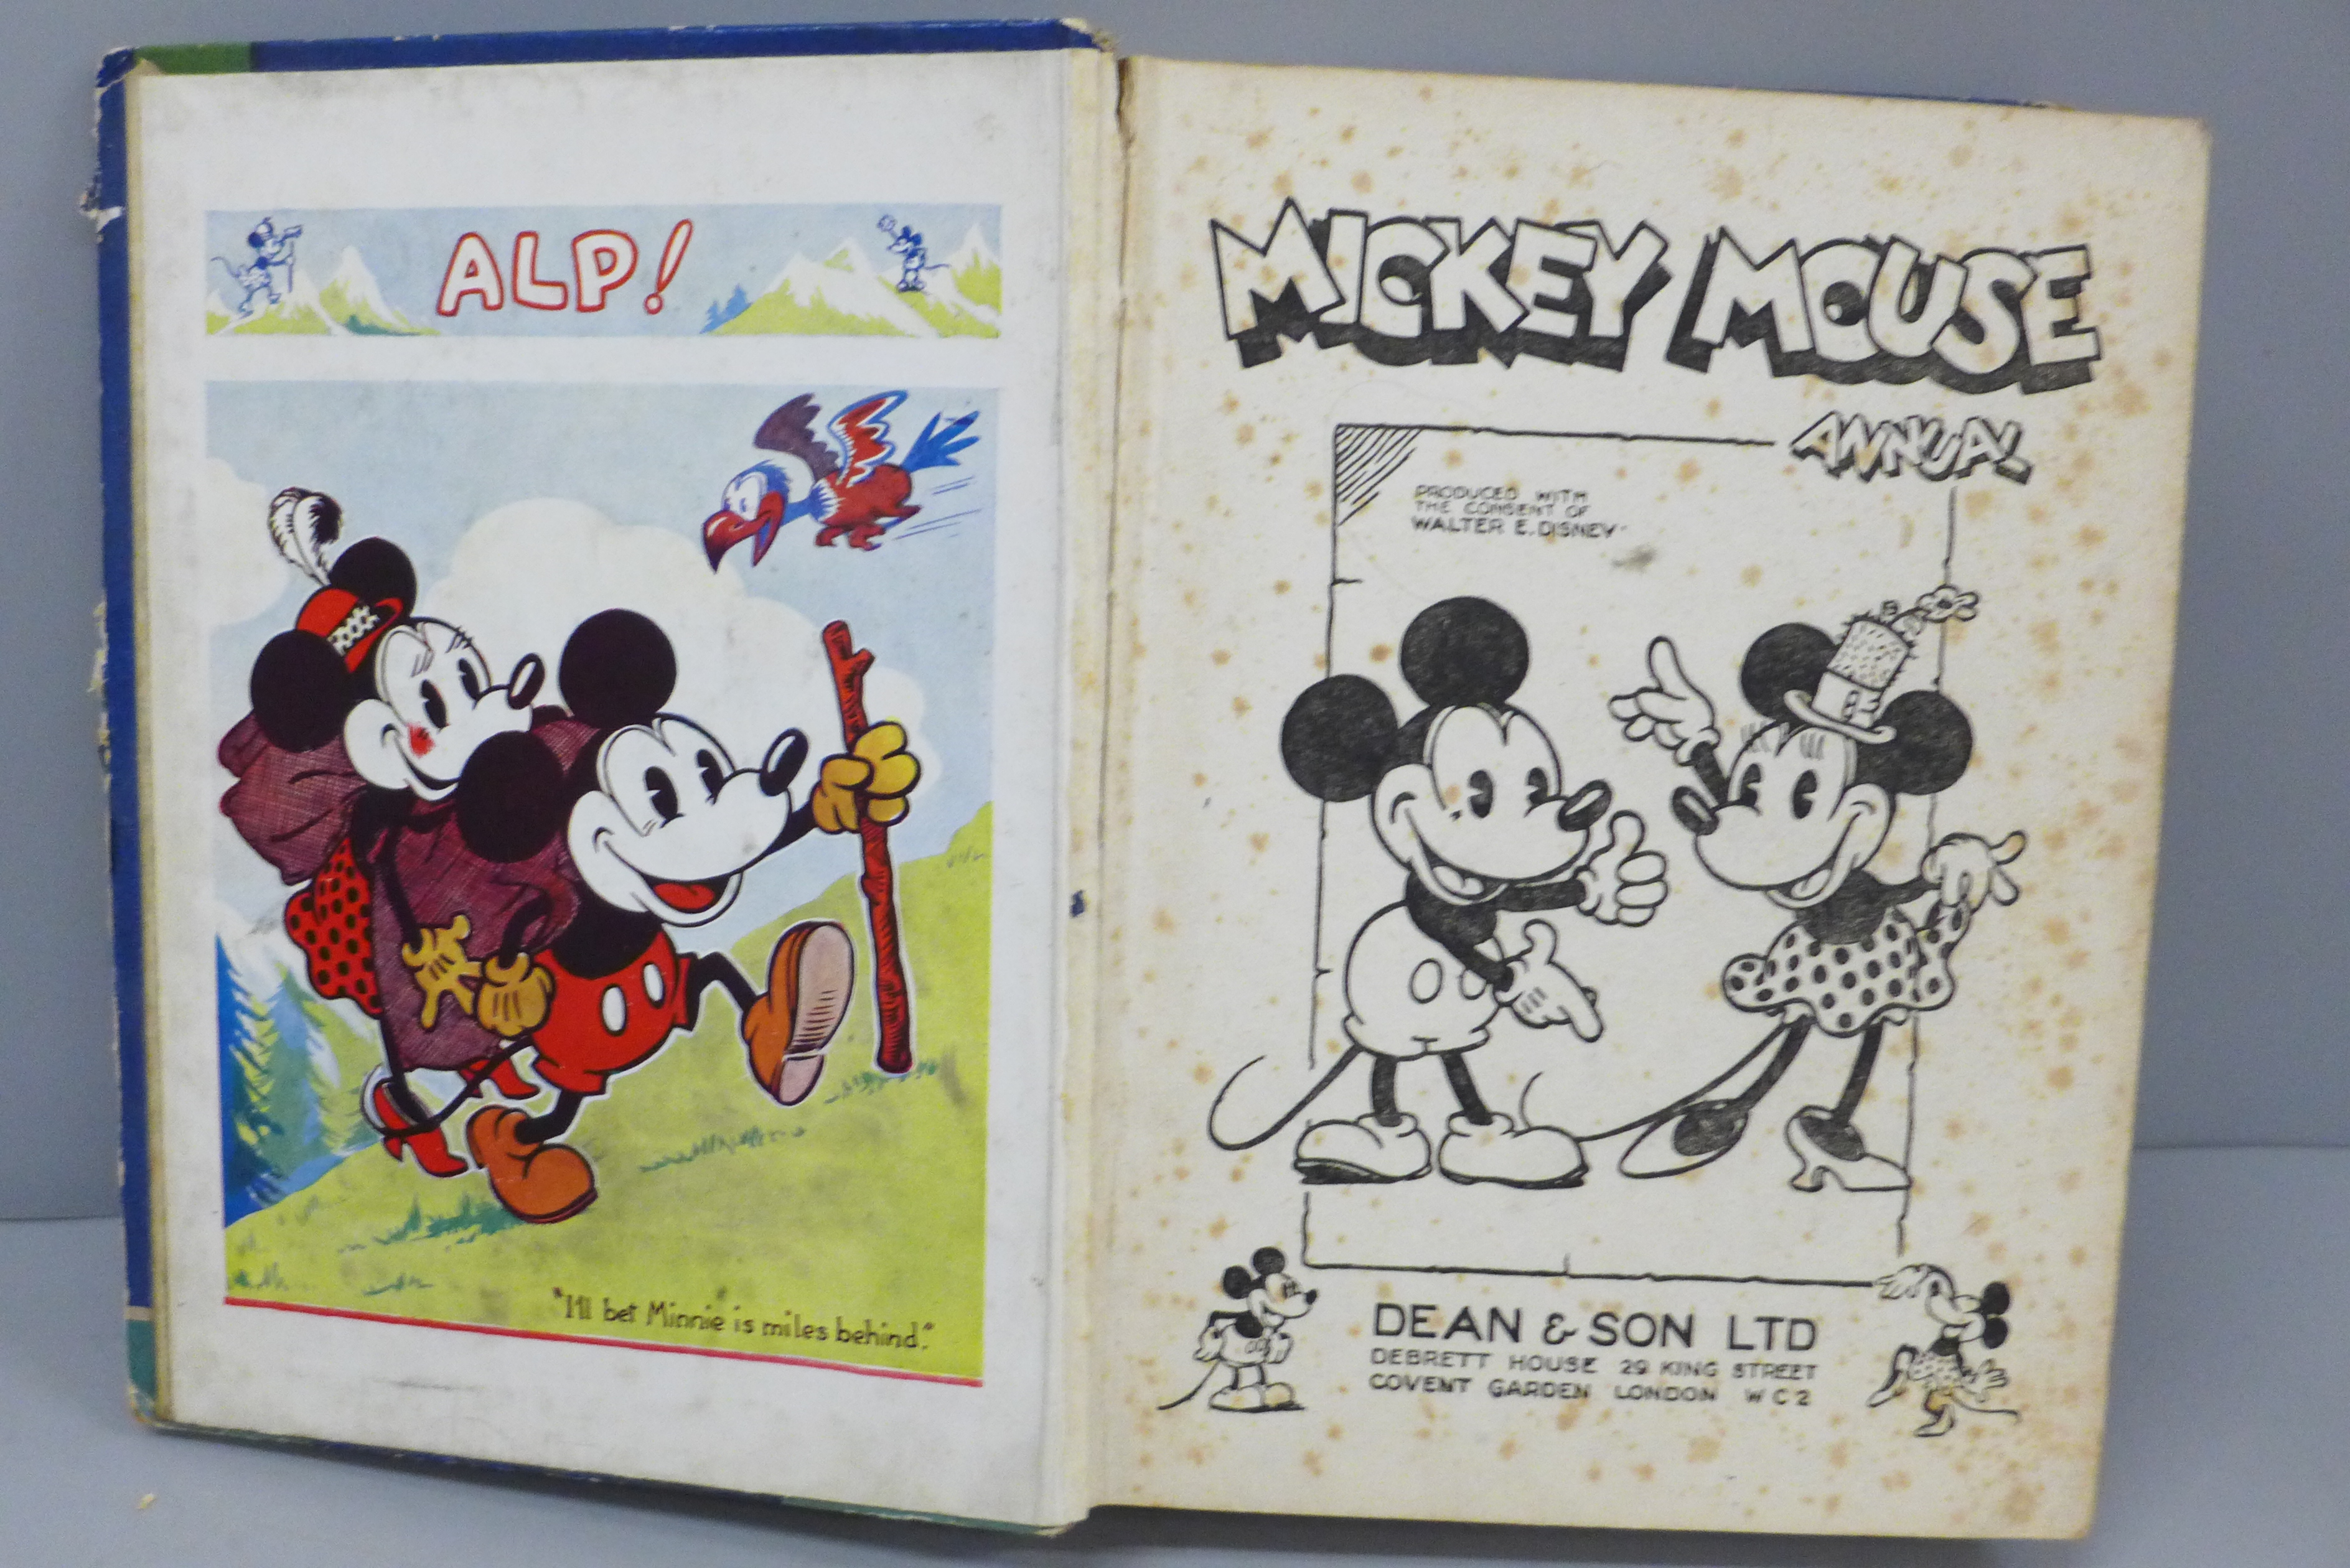 A 1933 Mickey Mouse Annual, lacking spine - Image 5 of 5